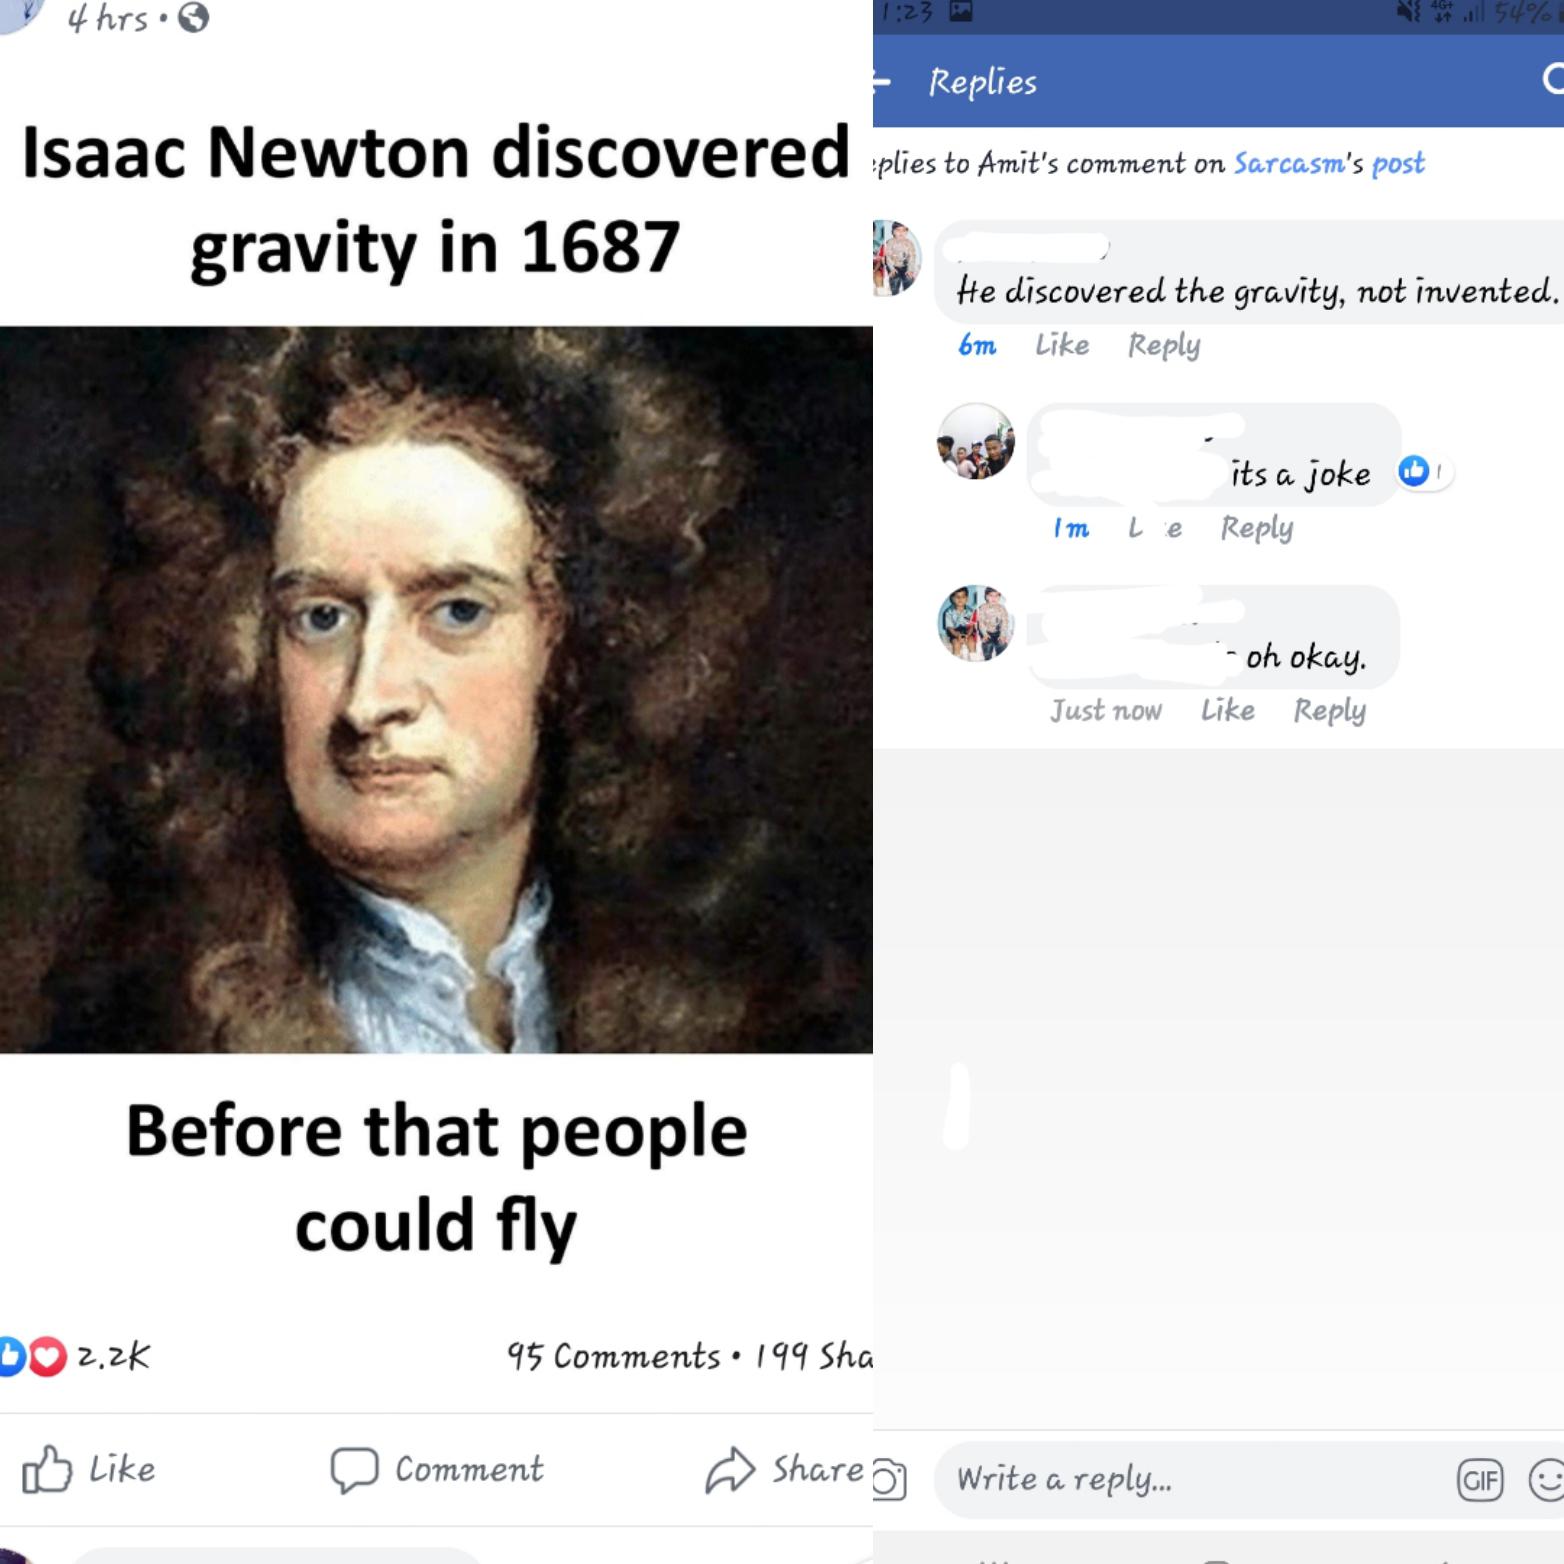 4hrs 3 .54% Replies Ve plies to Amit's comment on Sarcasm's post Isaac Newton discovered plies to Amit's comment on Sarcasm's post gravity in 1687 He discovered the gravity, not invented. 6m its a joke im Le .. oh okay. Just now Before that people could…